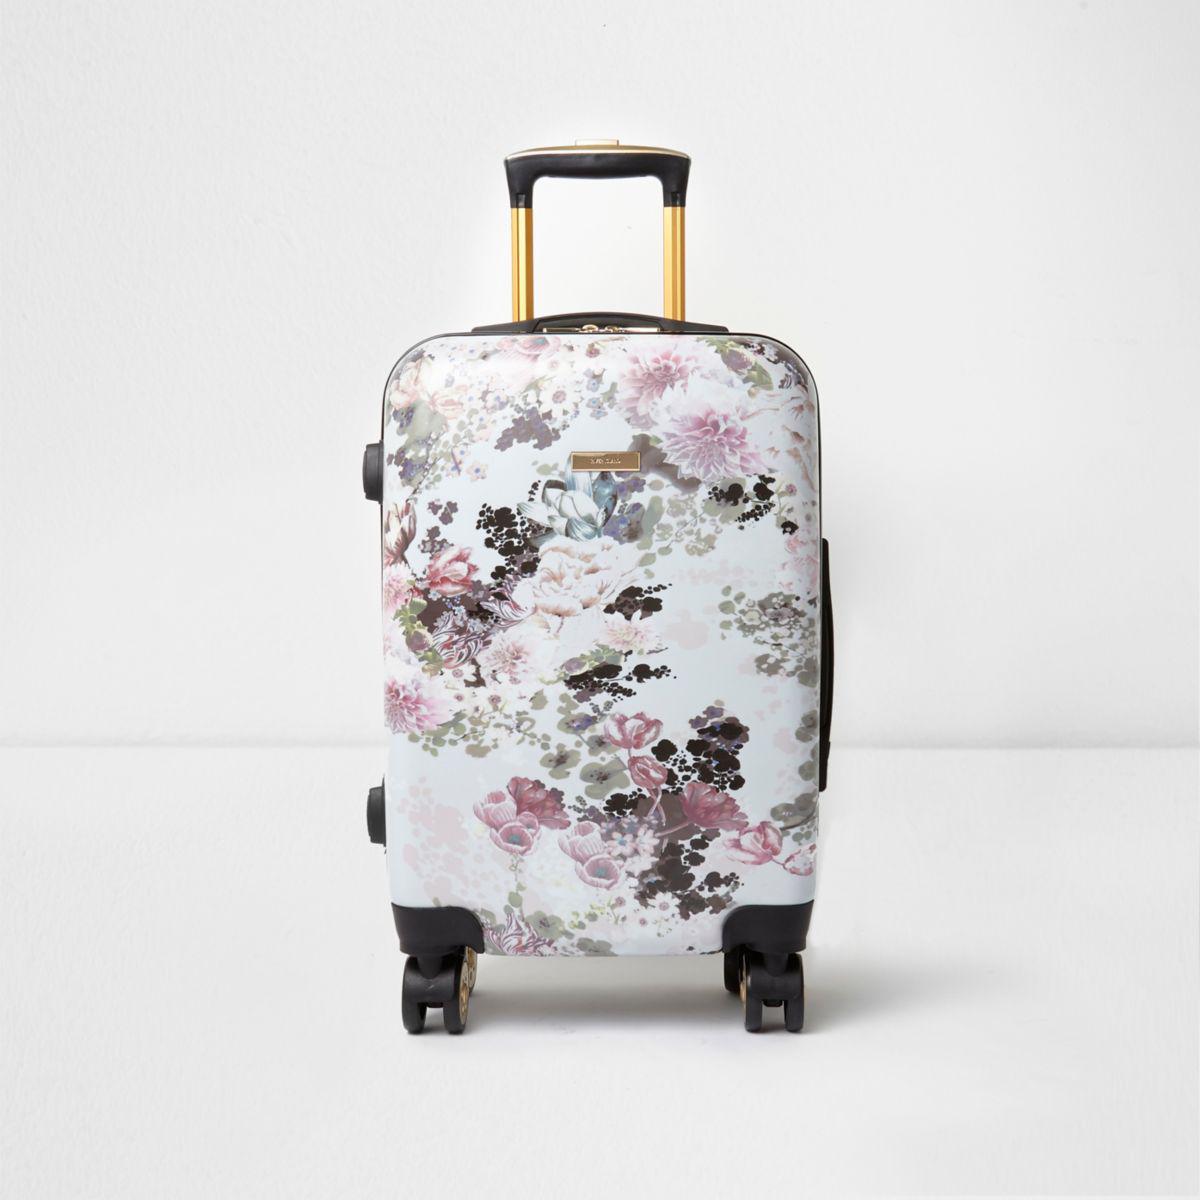 Lyst - River Island Pink Floral Print Plastic Four Wheel Suitcase Pink ...